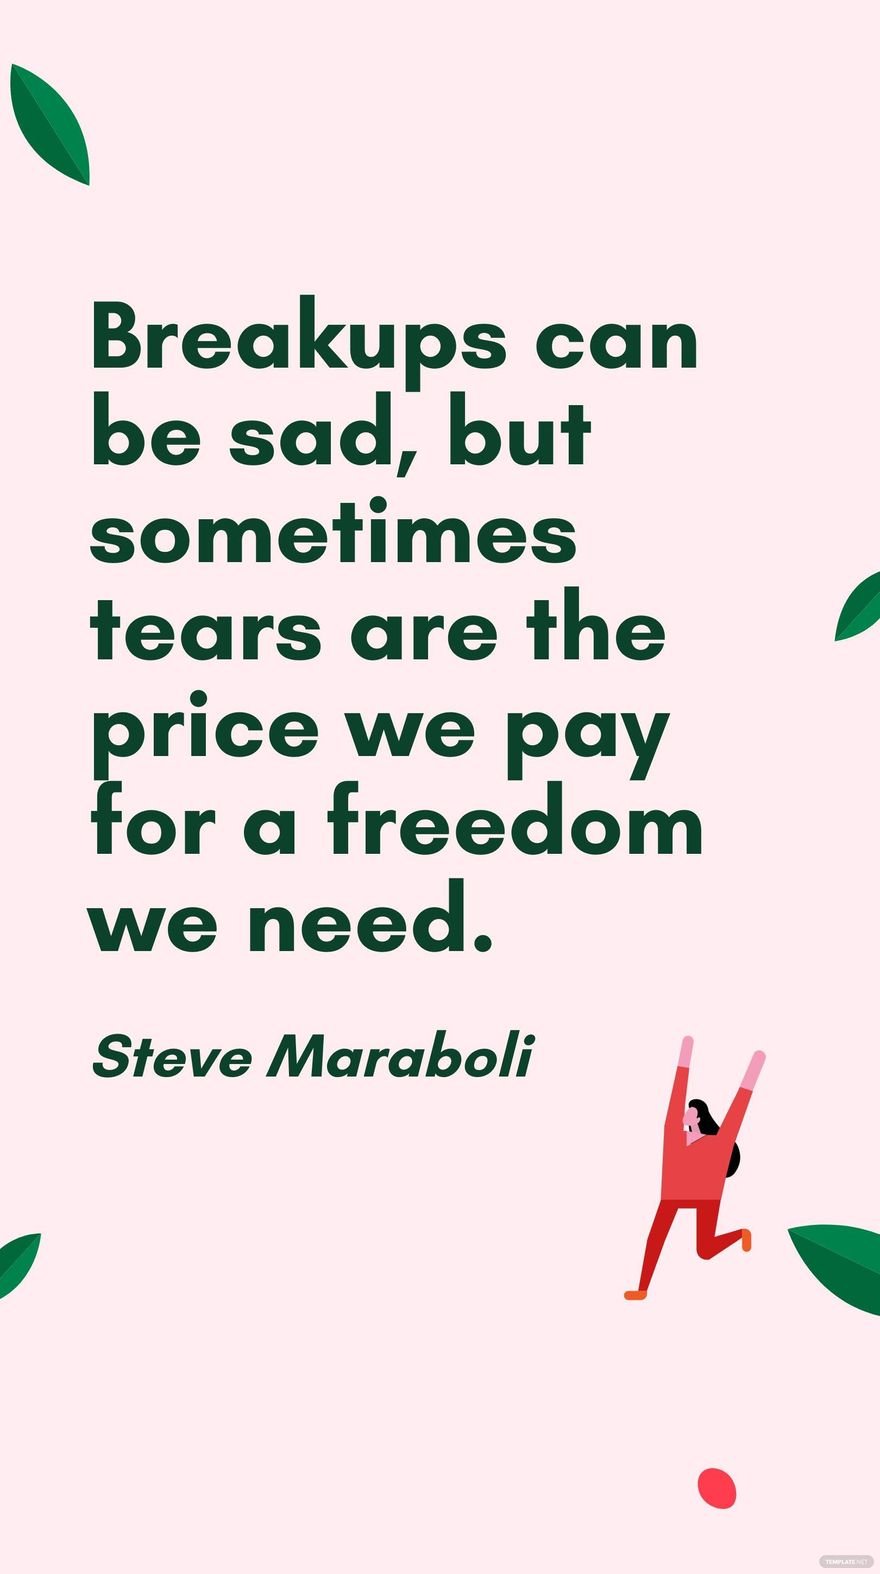 Steve Maraboli - Breakups can be sad, but sometimes tears are the price we pay for a freedom we need.